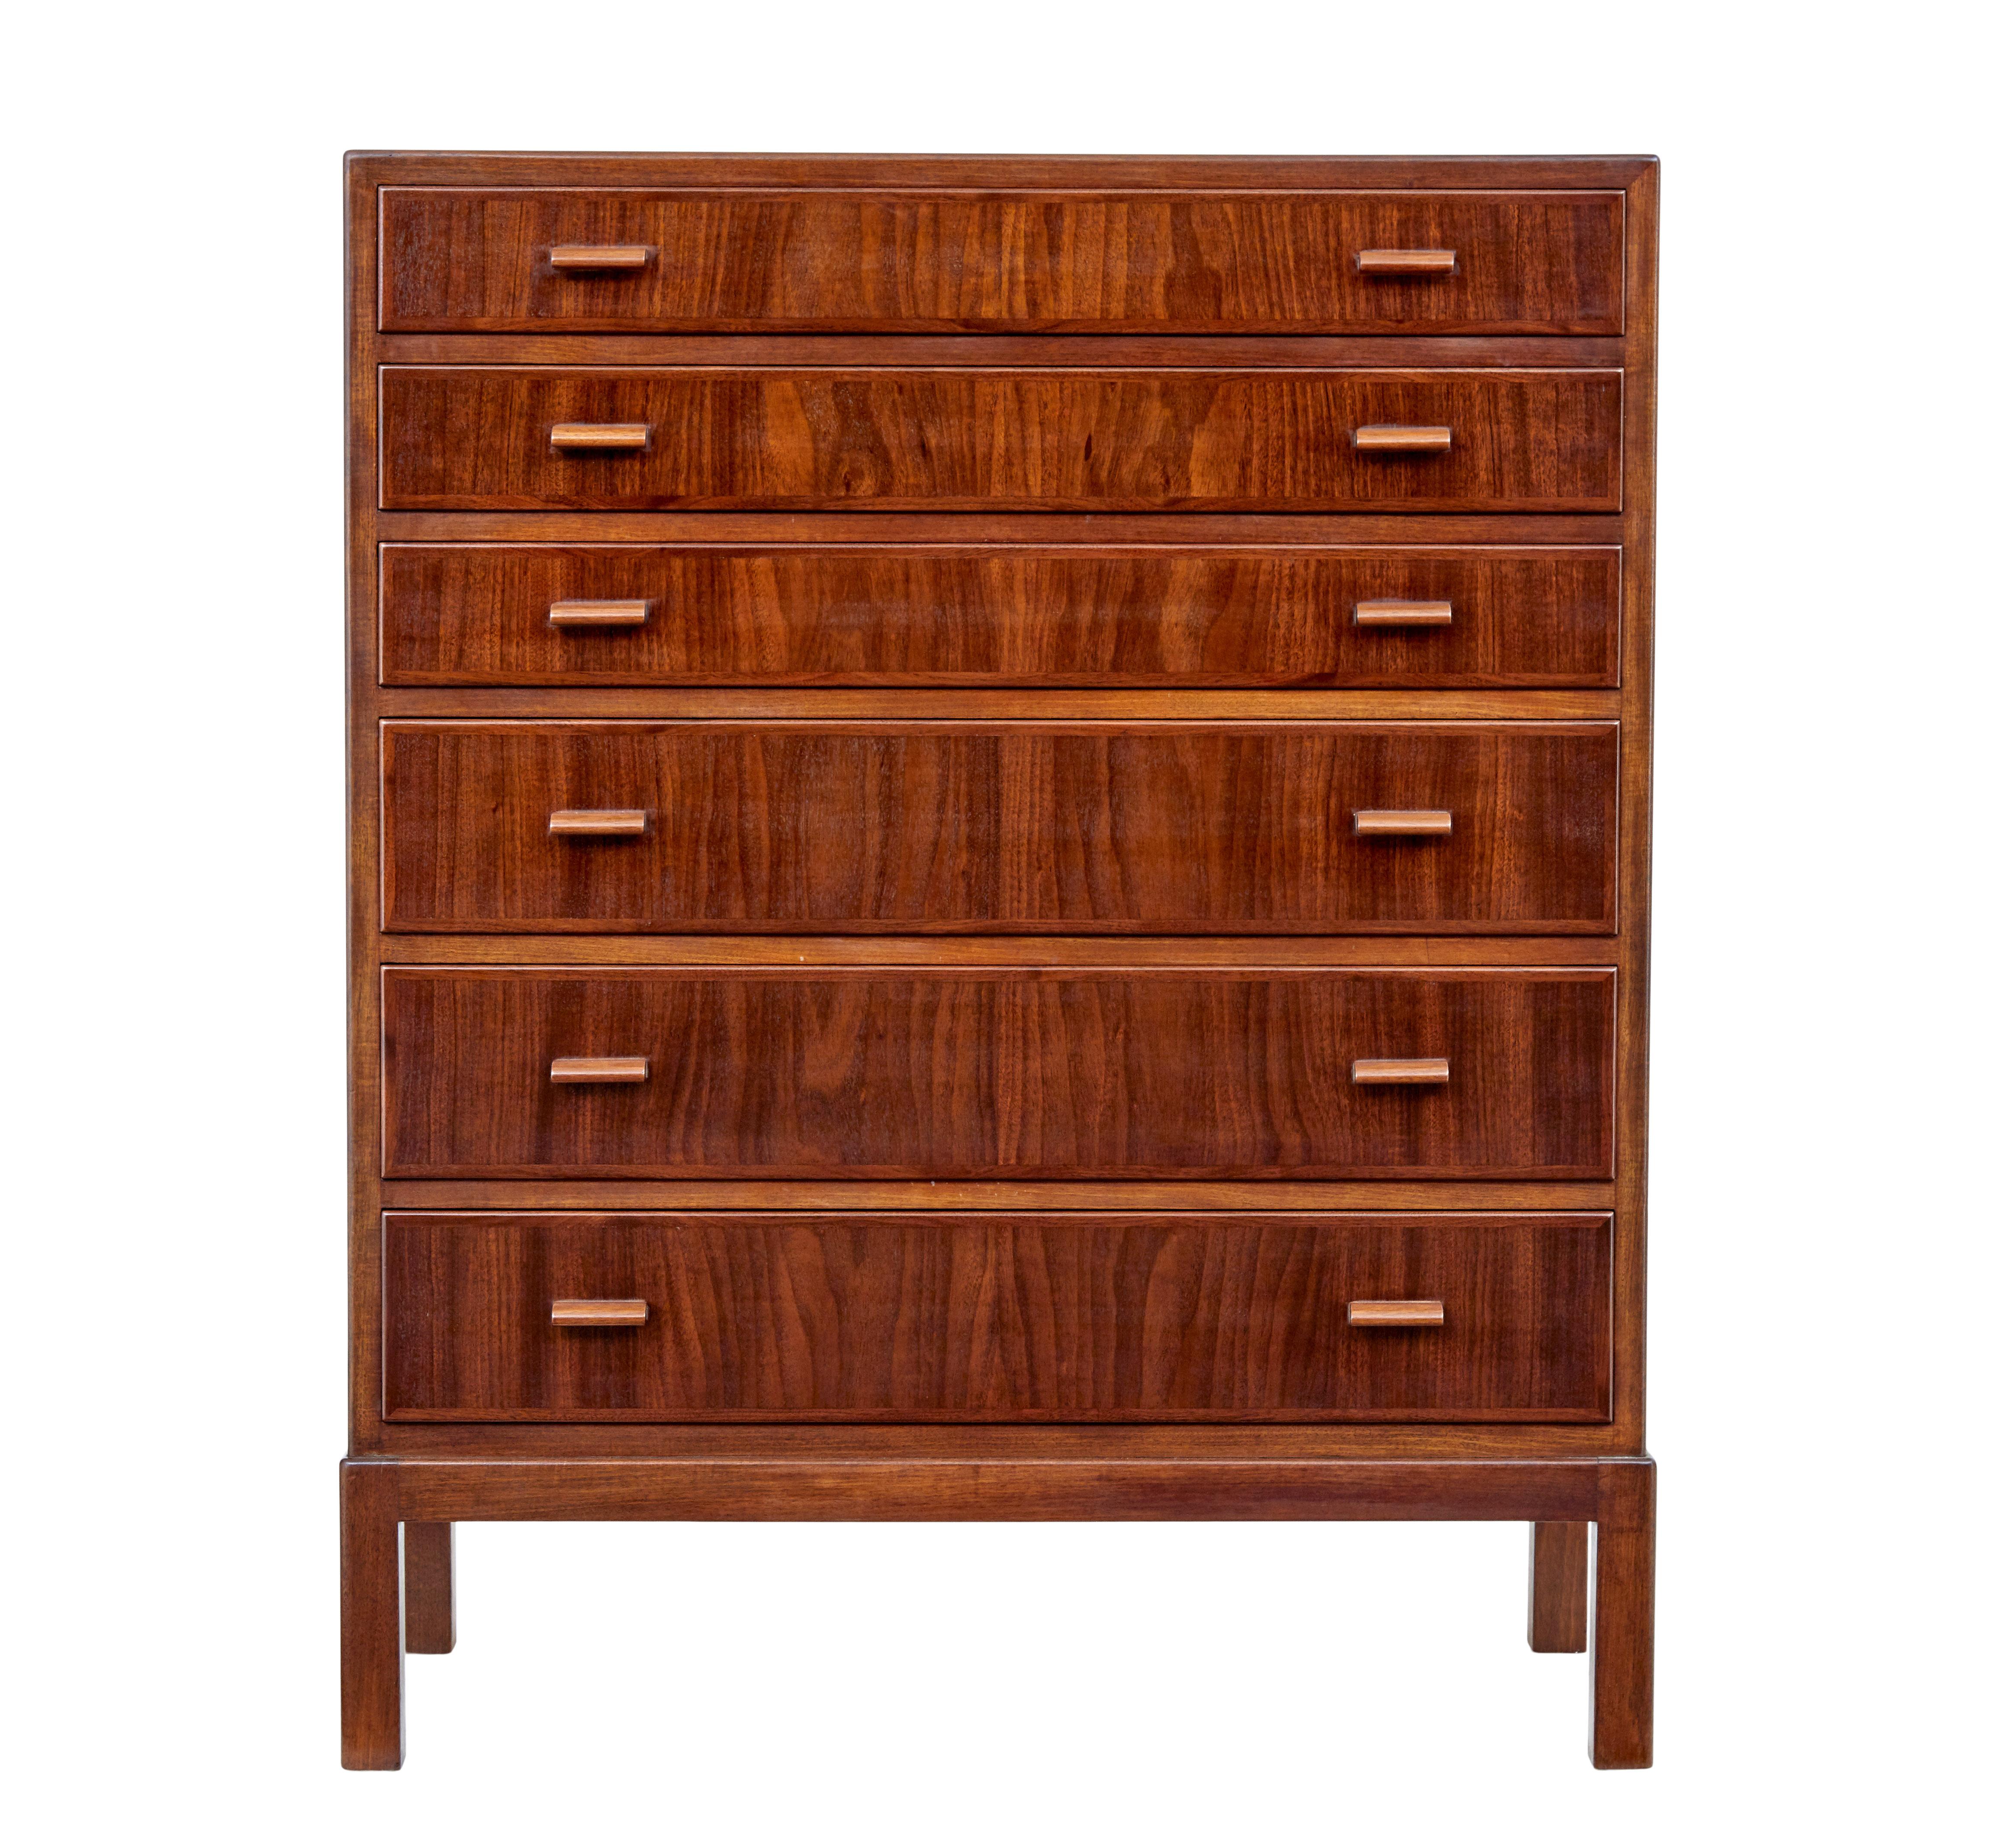 Hand-Crafted Mid-20th Century Danish Teak Chest of Drawers For Sale